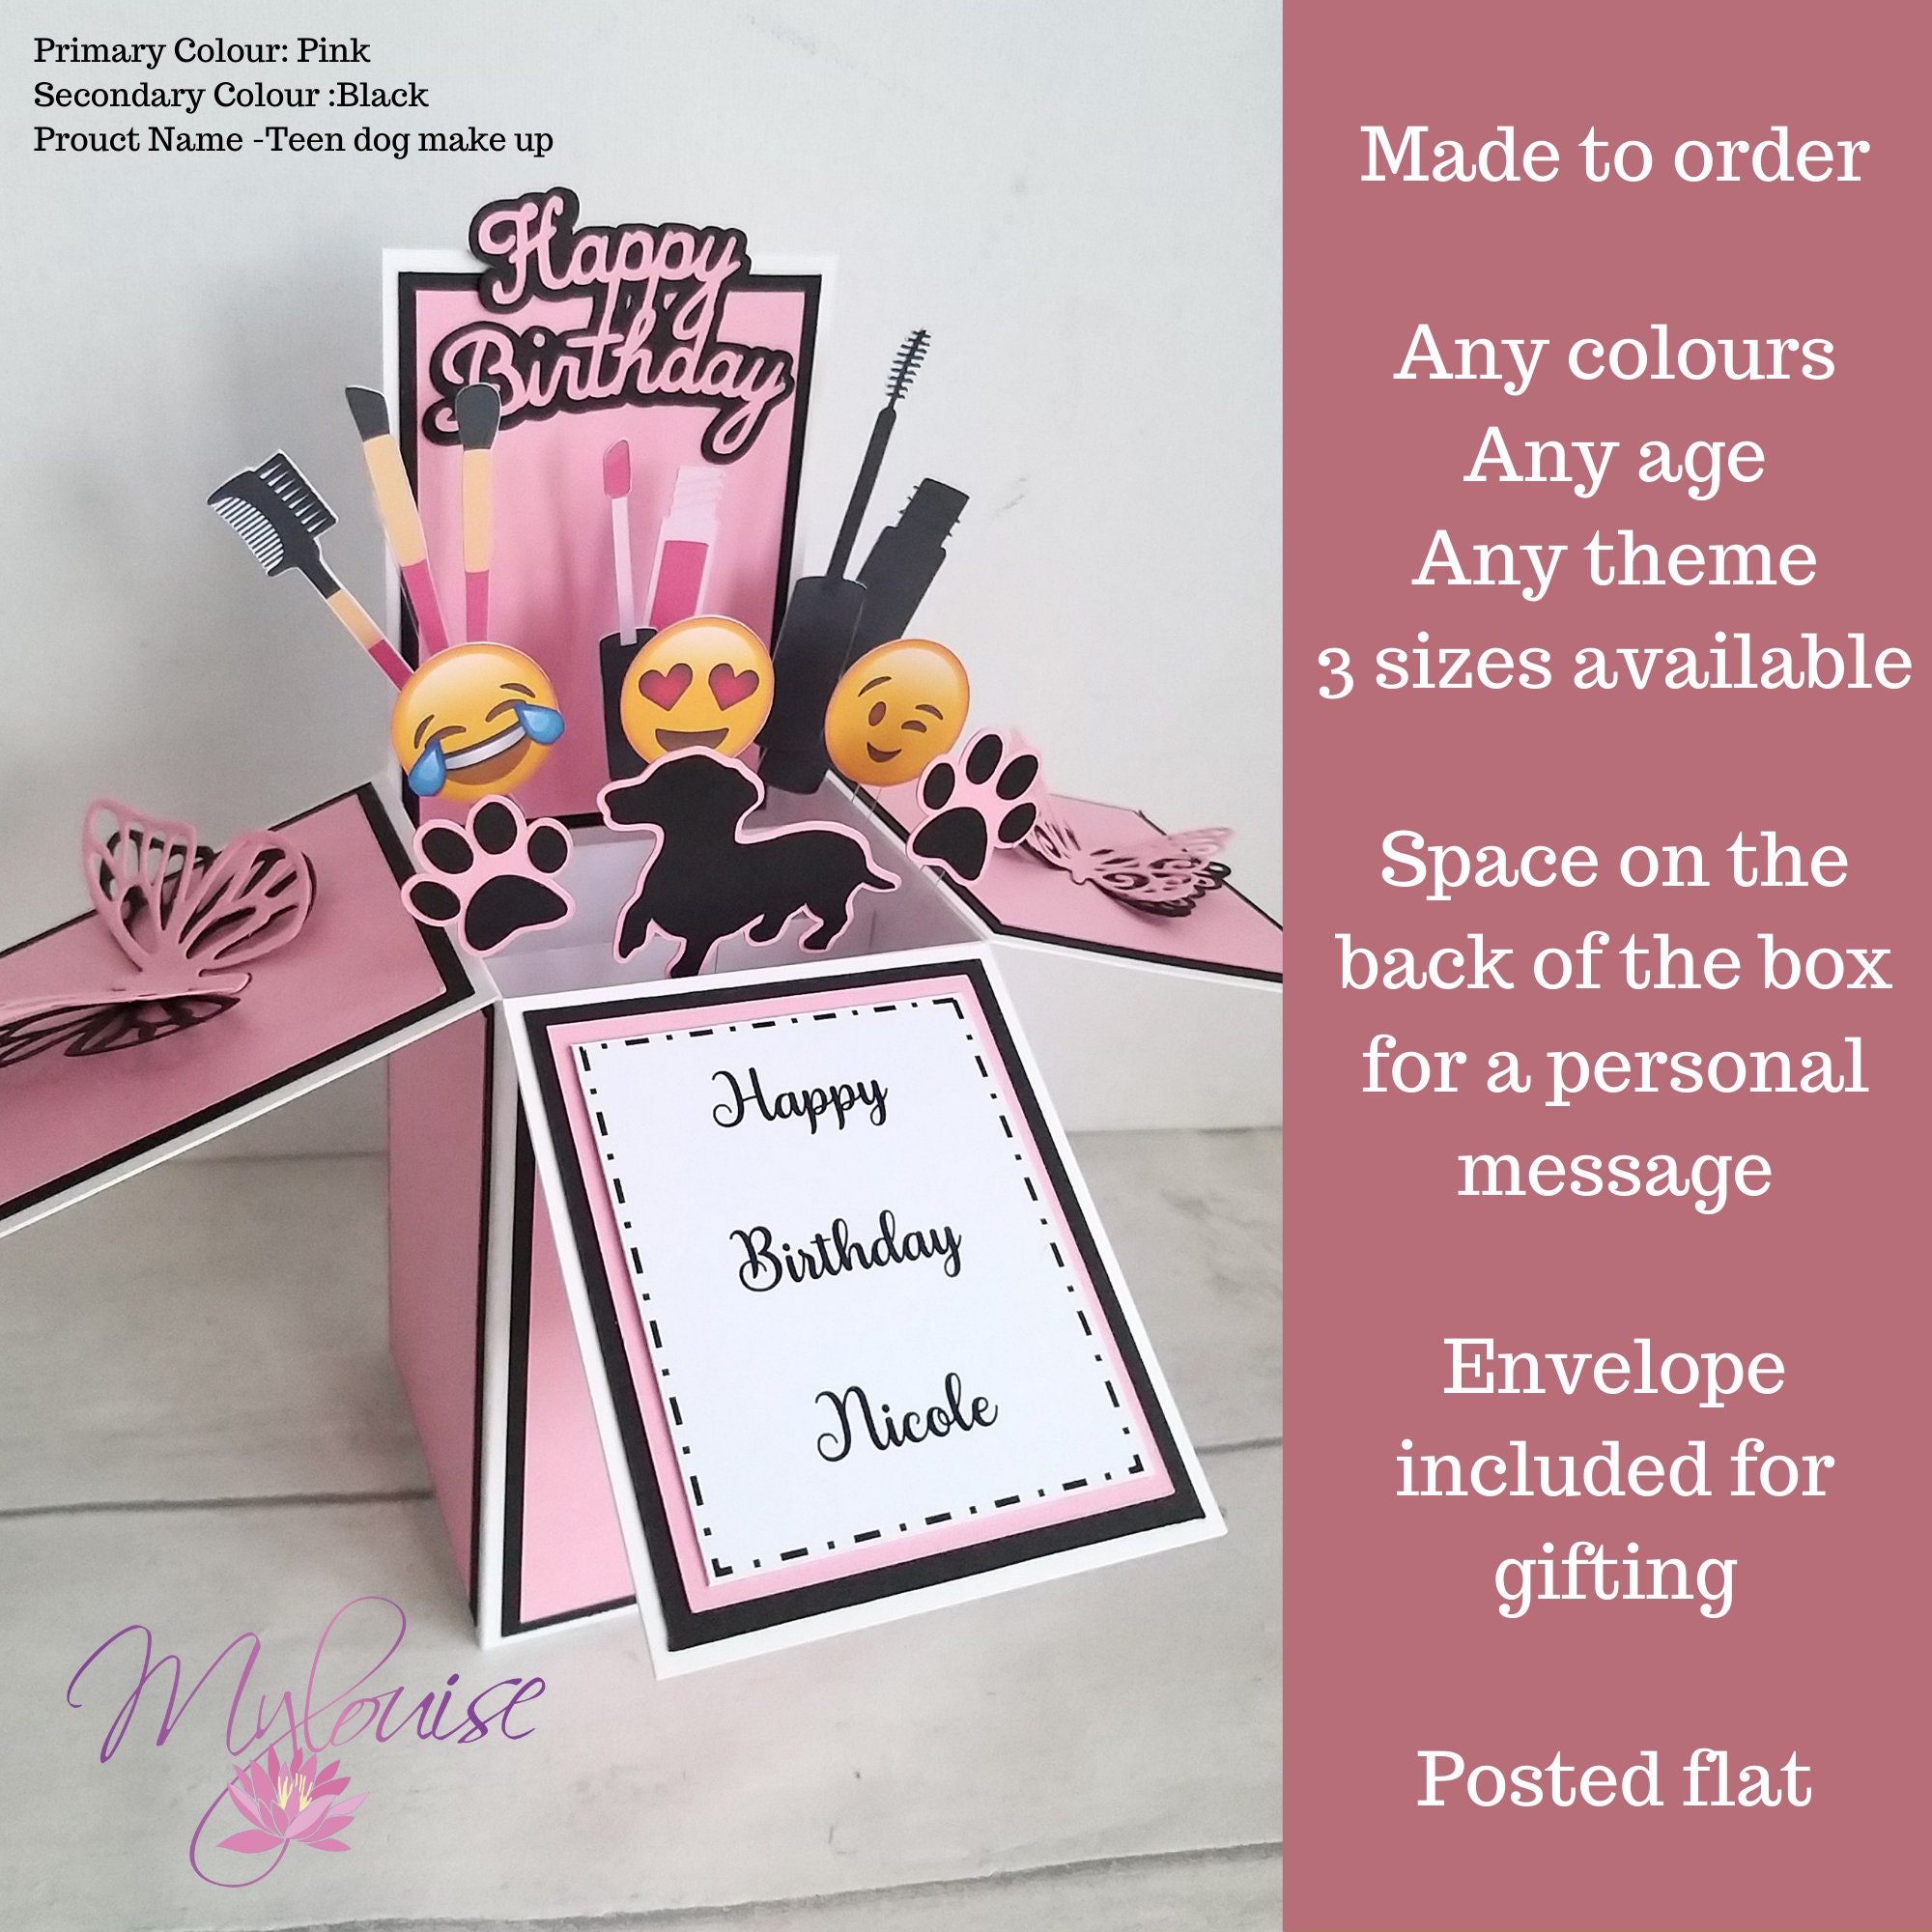 Card Crafting Explosion Arts and Crafts Box- Complete Card Making Kit for Girls - Birthday Gift Box to Tween - DIY Greeting Cards Stationary Set Make